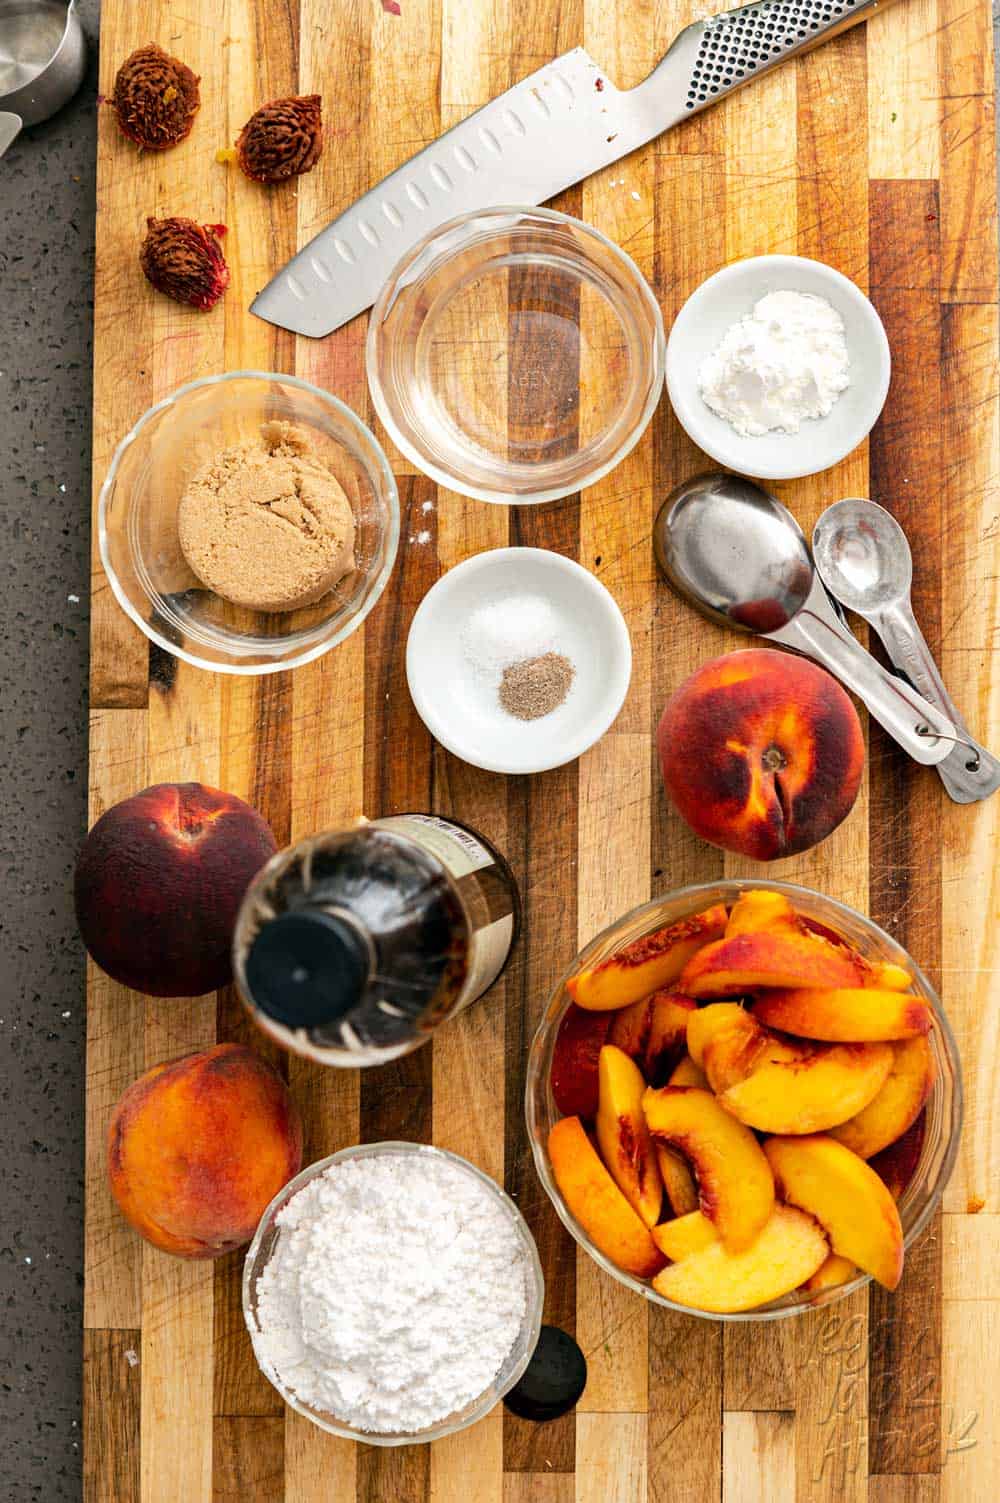 Ingredients measured out on a cutting board, including peaches, sugar, and more.